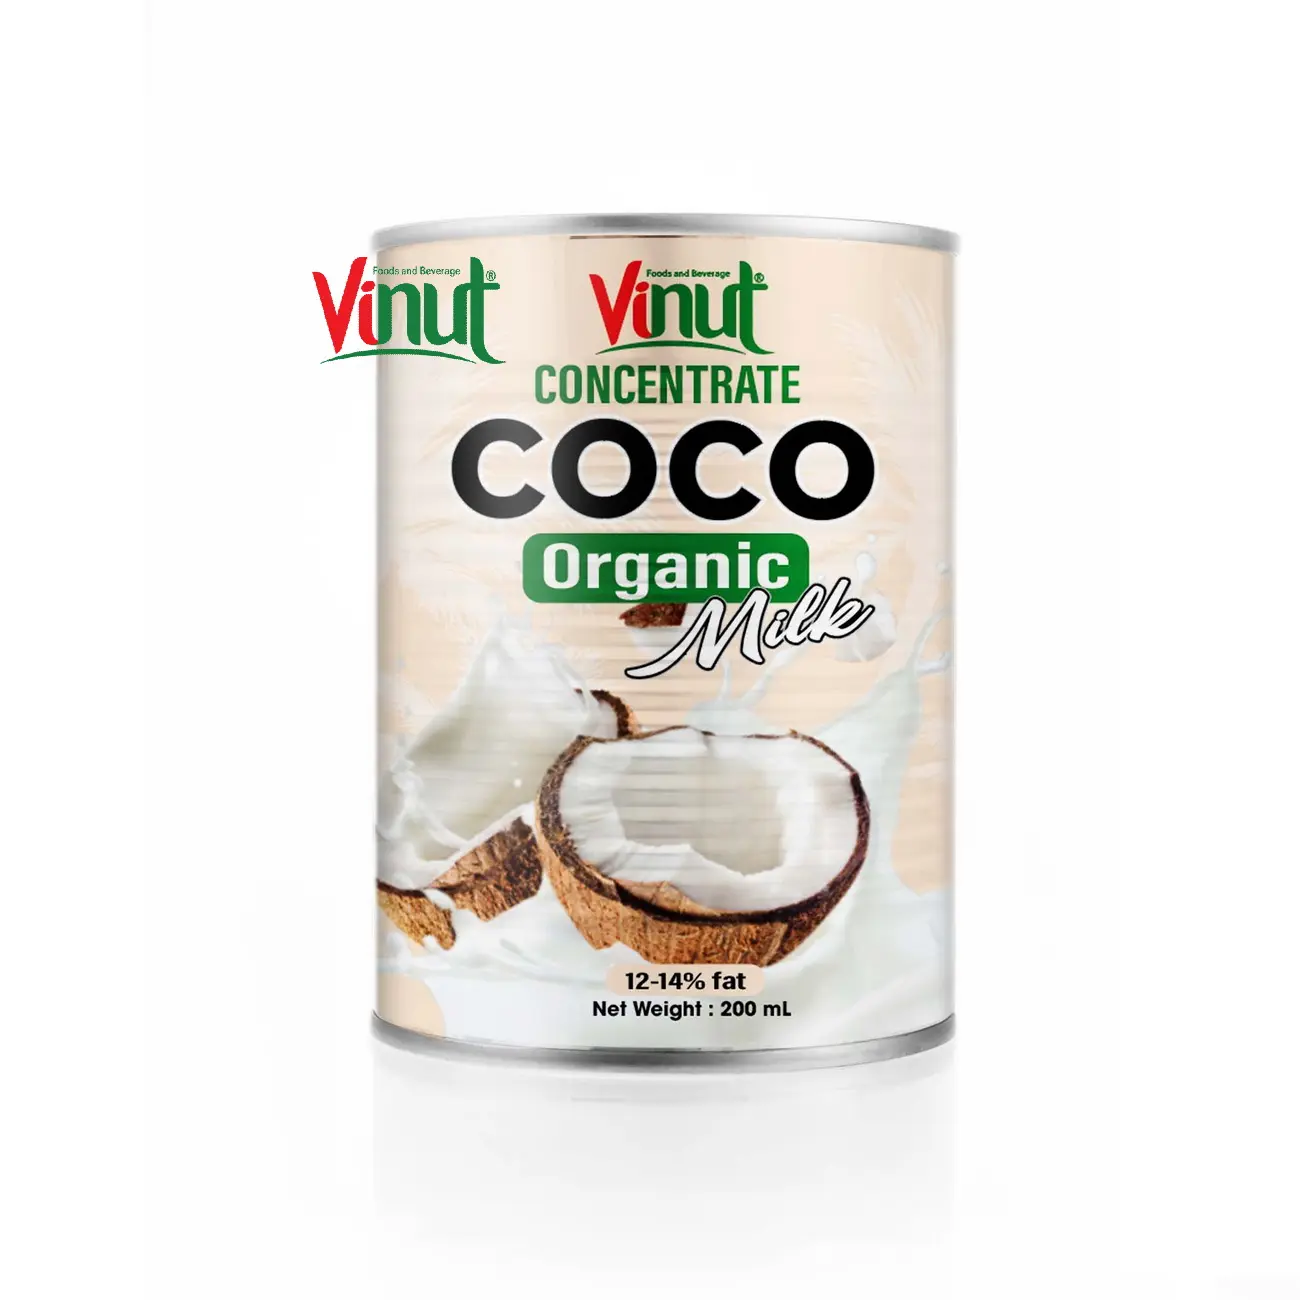 VINUT Coconut Milk - 200ml can Concentrate Coconut Milk Organic (12%-14% fat) Supplier and Manufacturer